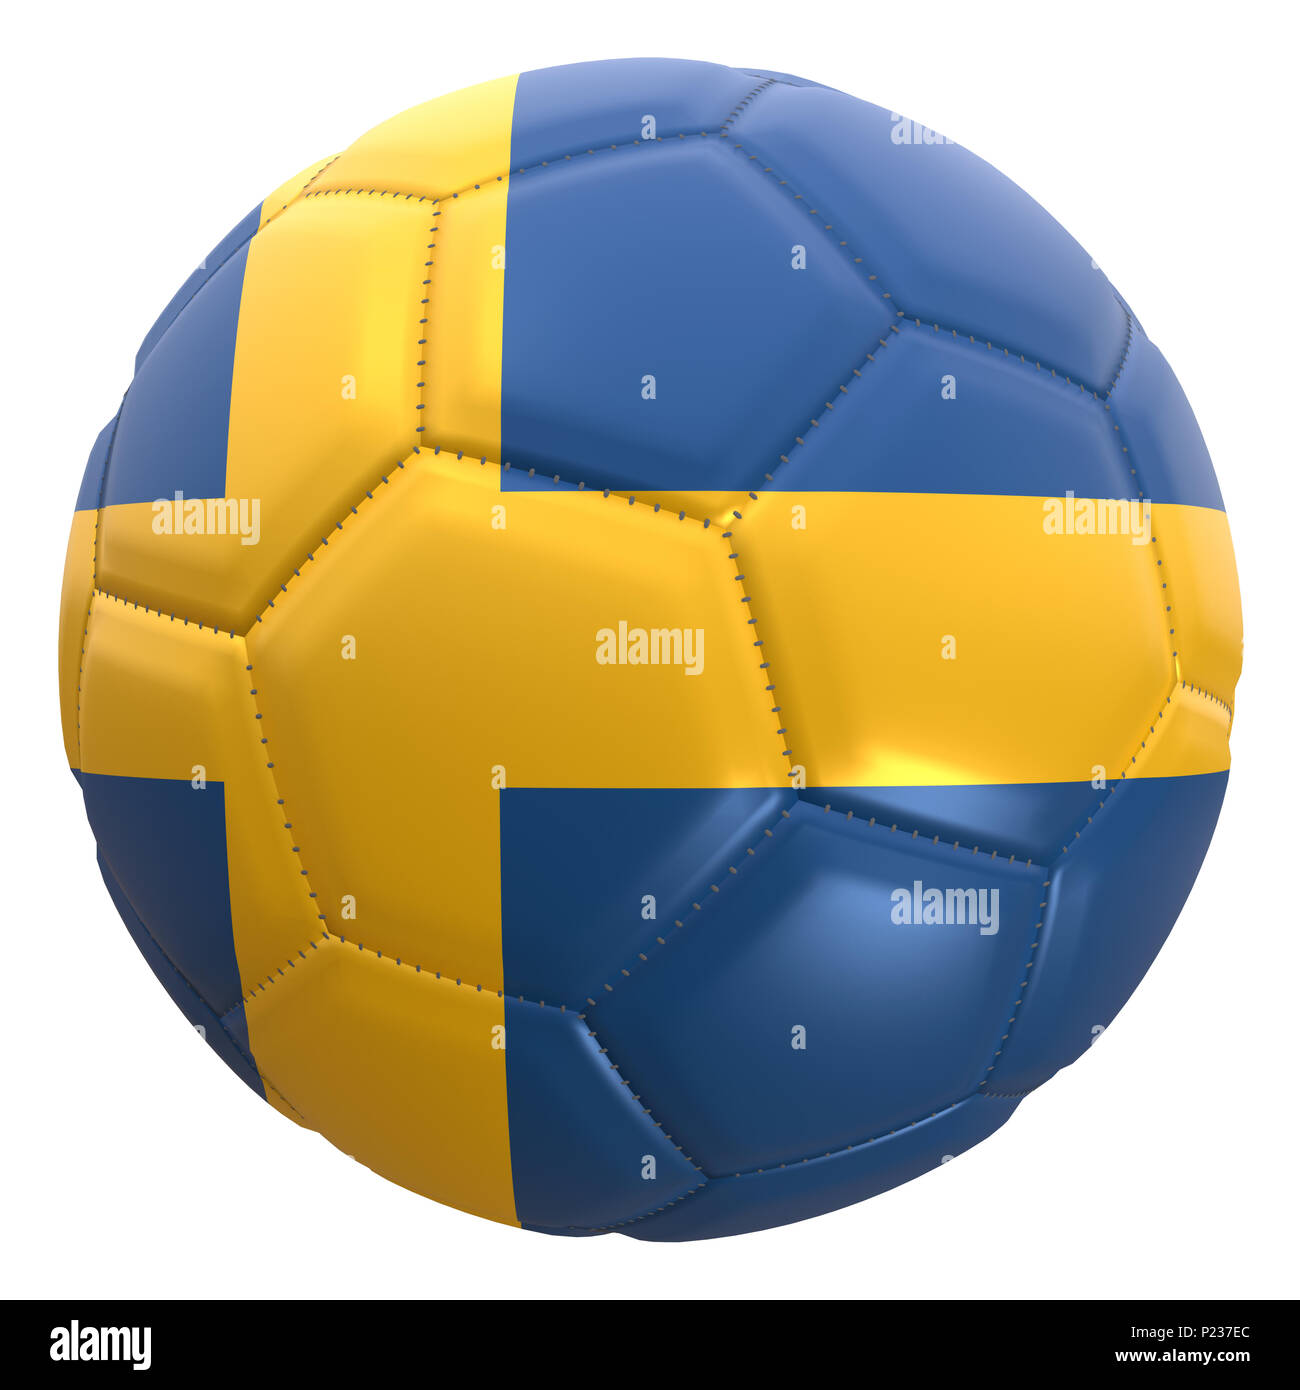 3d rendering of a Sweden flag on a soccer ball. Sweden is one of the team of world cup championship in Russia 2018. Stock Photo